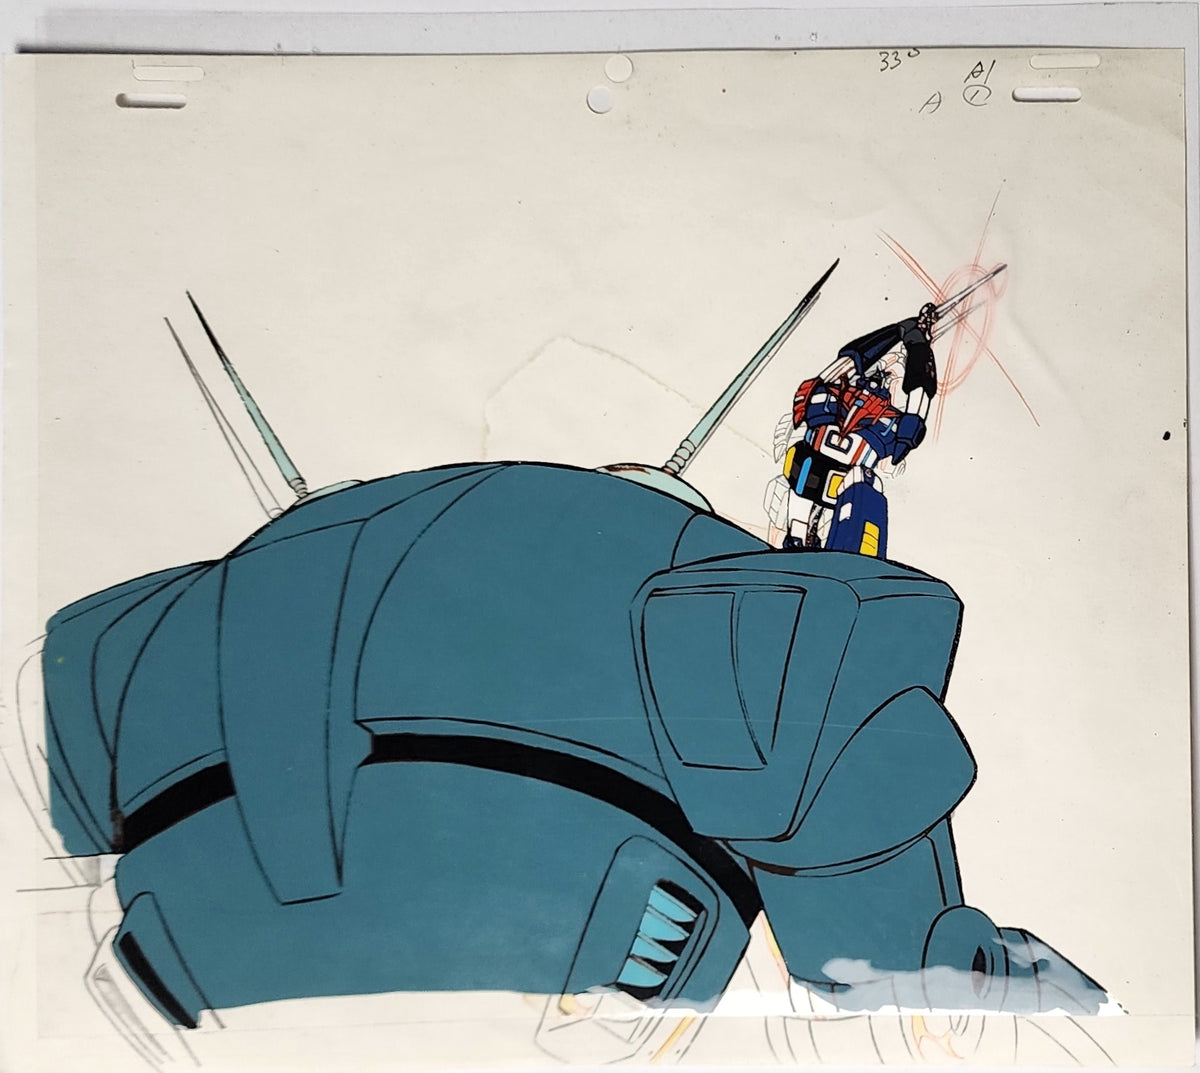 Voltron Vehicle Force Anime Animation Production Cel: 4395